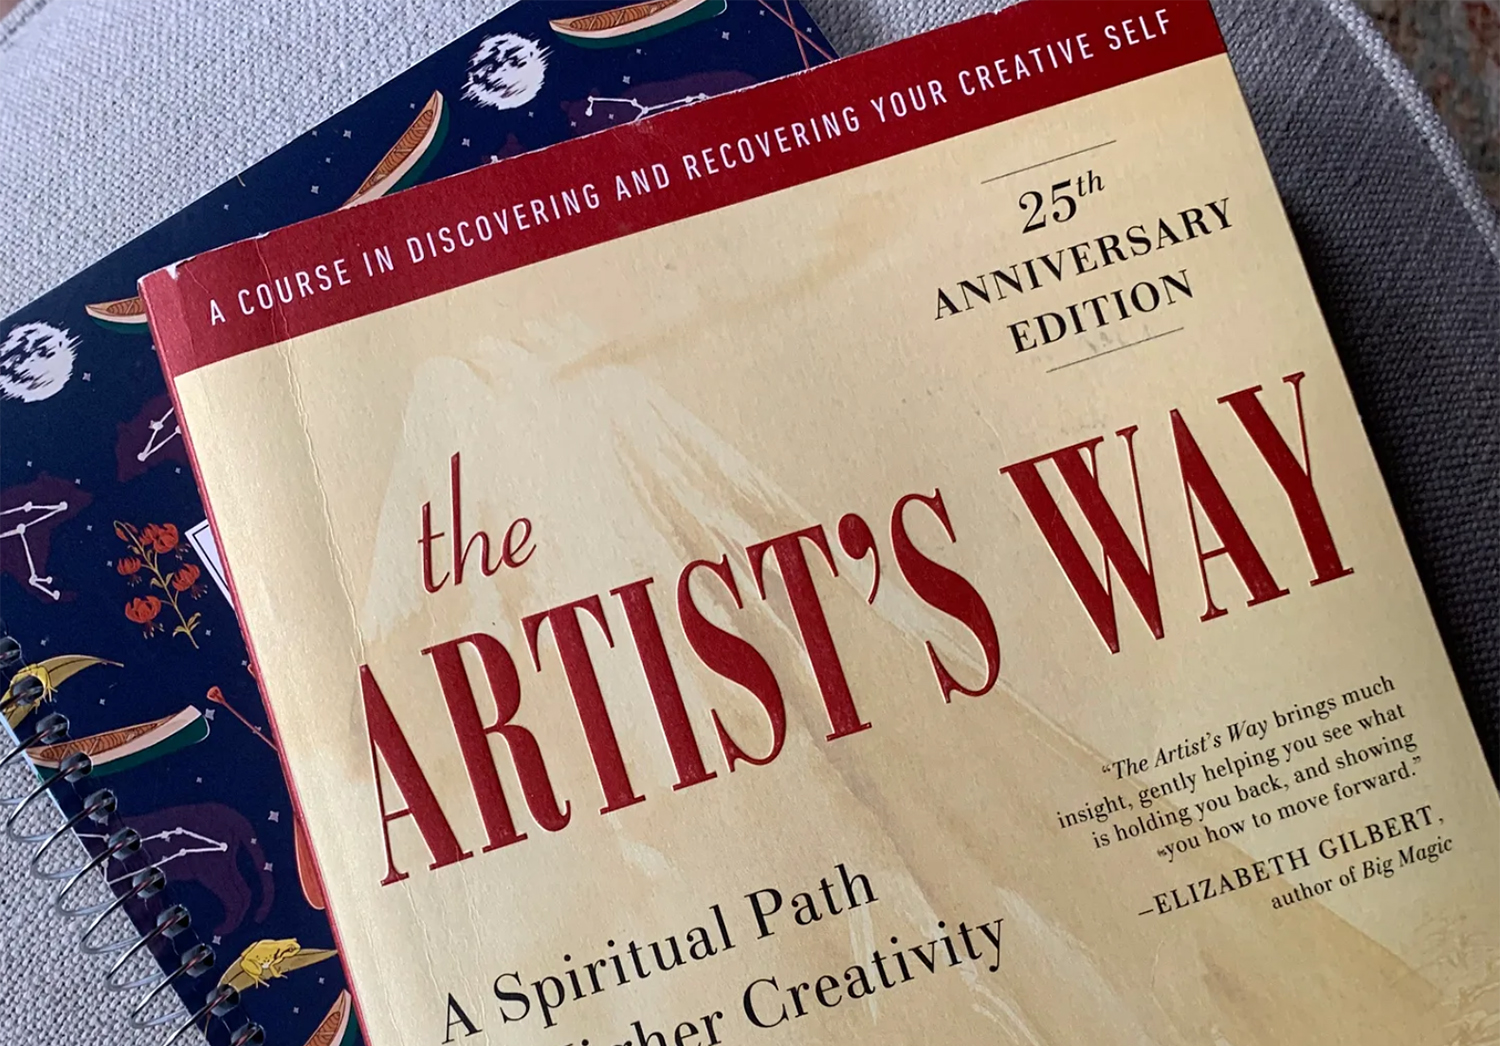 Creative block? Read The Artists Way by Julia Cameron - THE MIDST